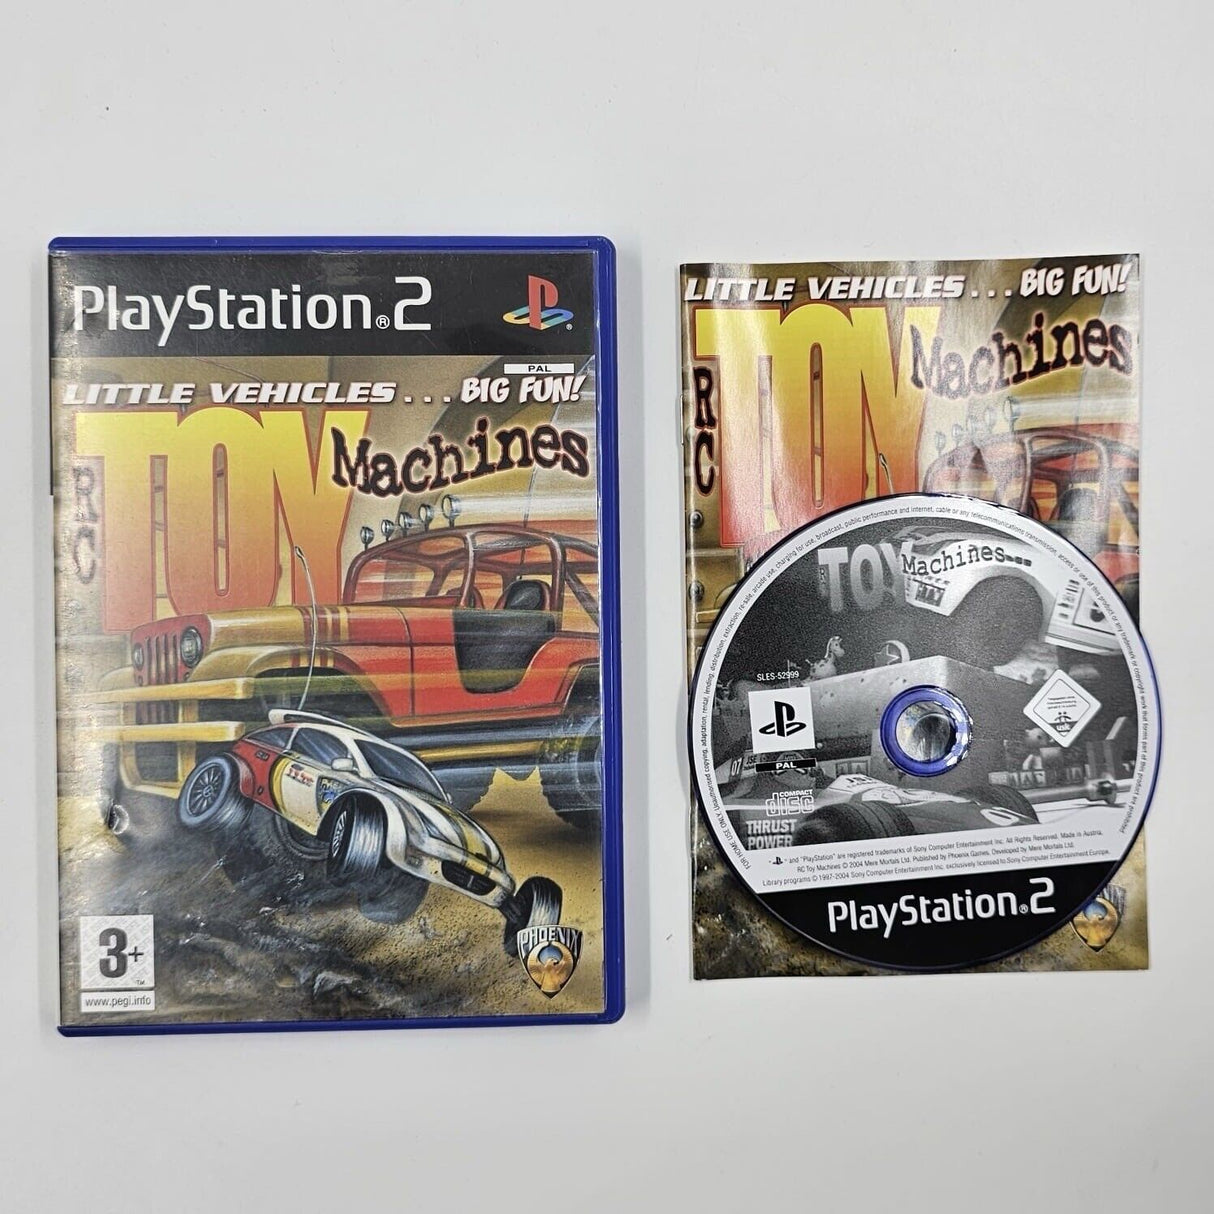 RC Toy Machines PS2 Playstation 2 Game + Manual PAL